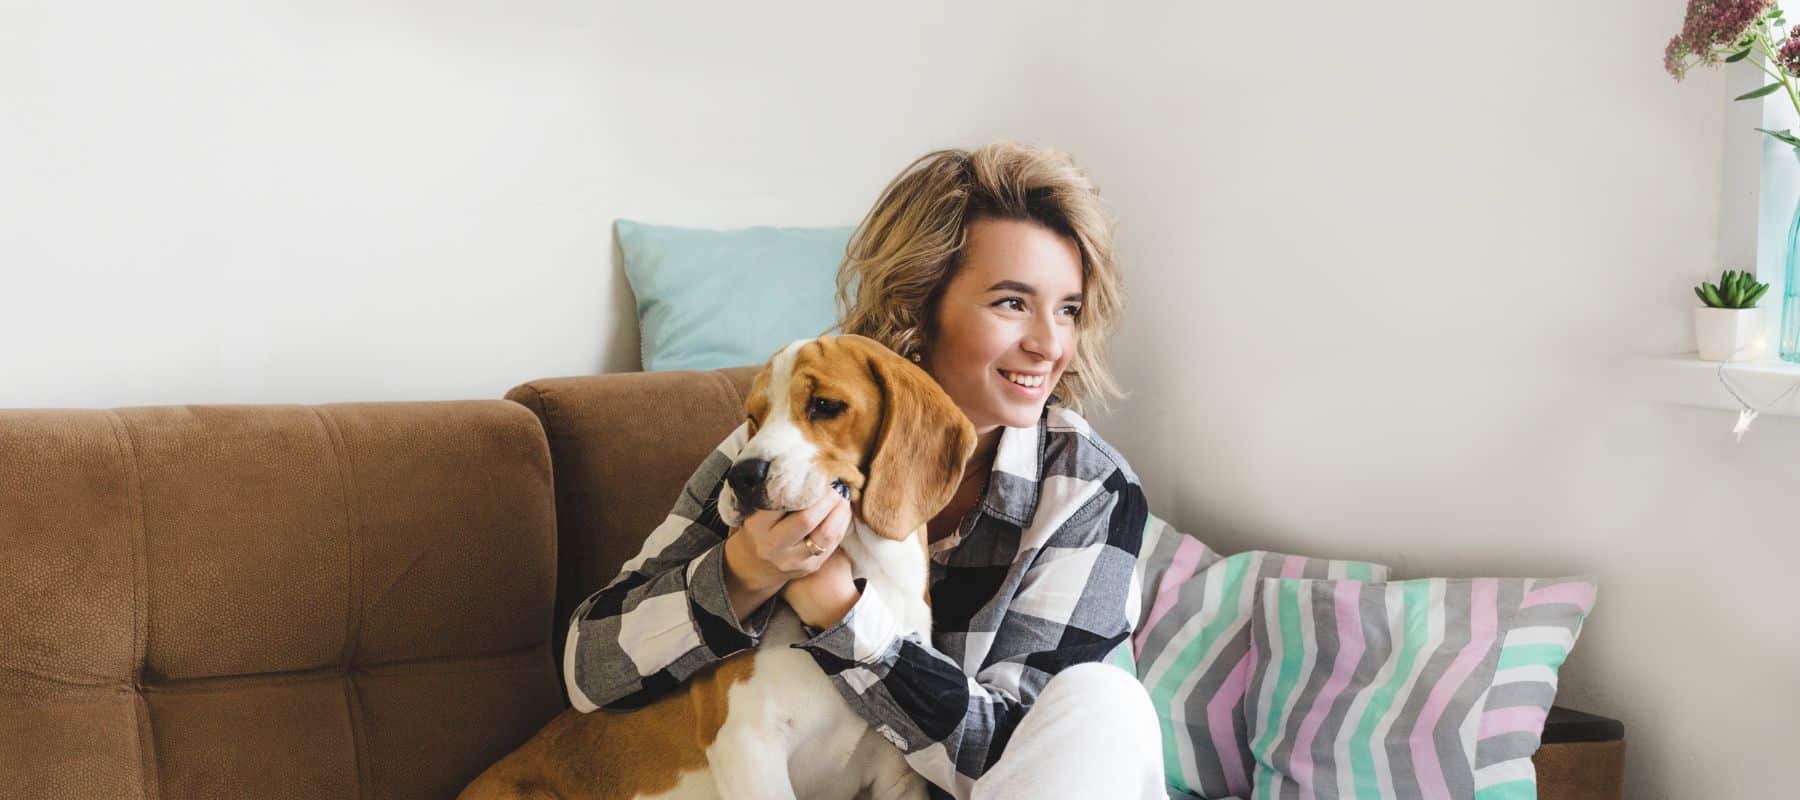 happy woman sitting on her couch with her dog smiling while holding the dog